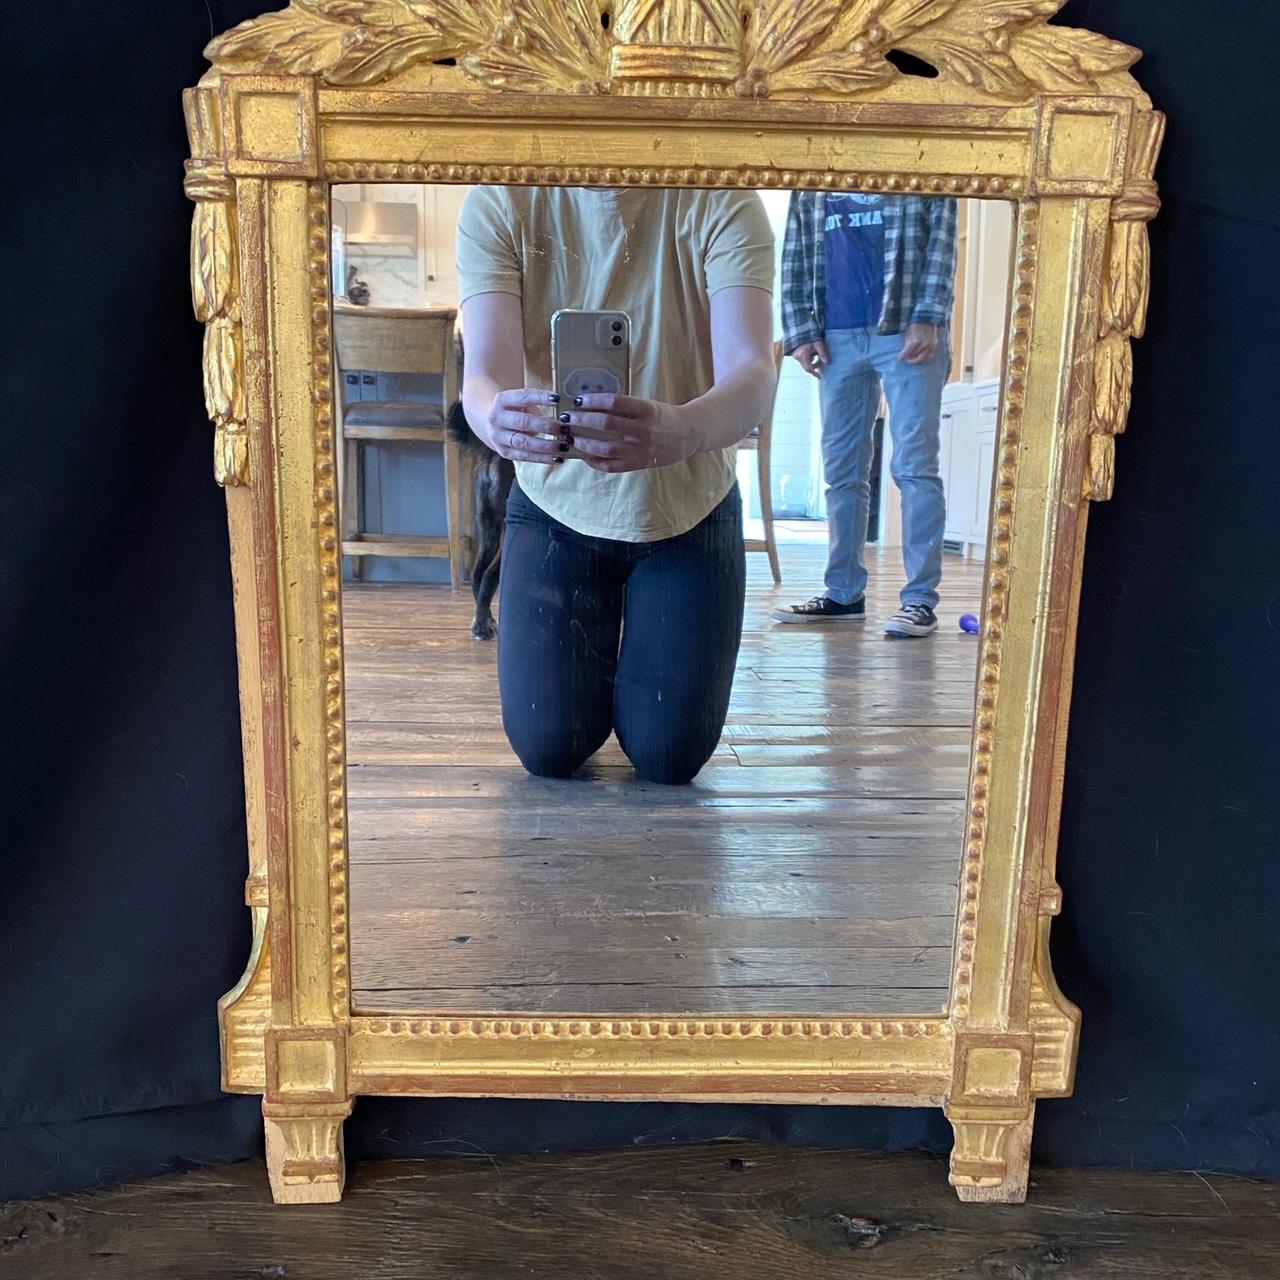 Early 19th century French acanthus adorned mirror with original gold gilt and new mirror glass. Top crown is an acanthus leaf wreath over a sheath of wheat crowned with a warrior's helmet and swords axes. Gorgeous!

